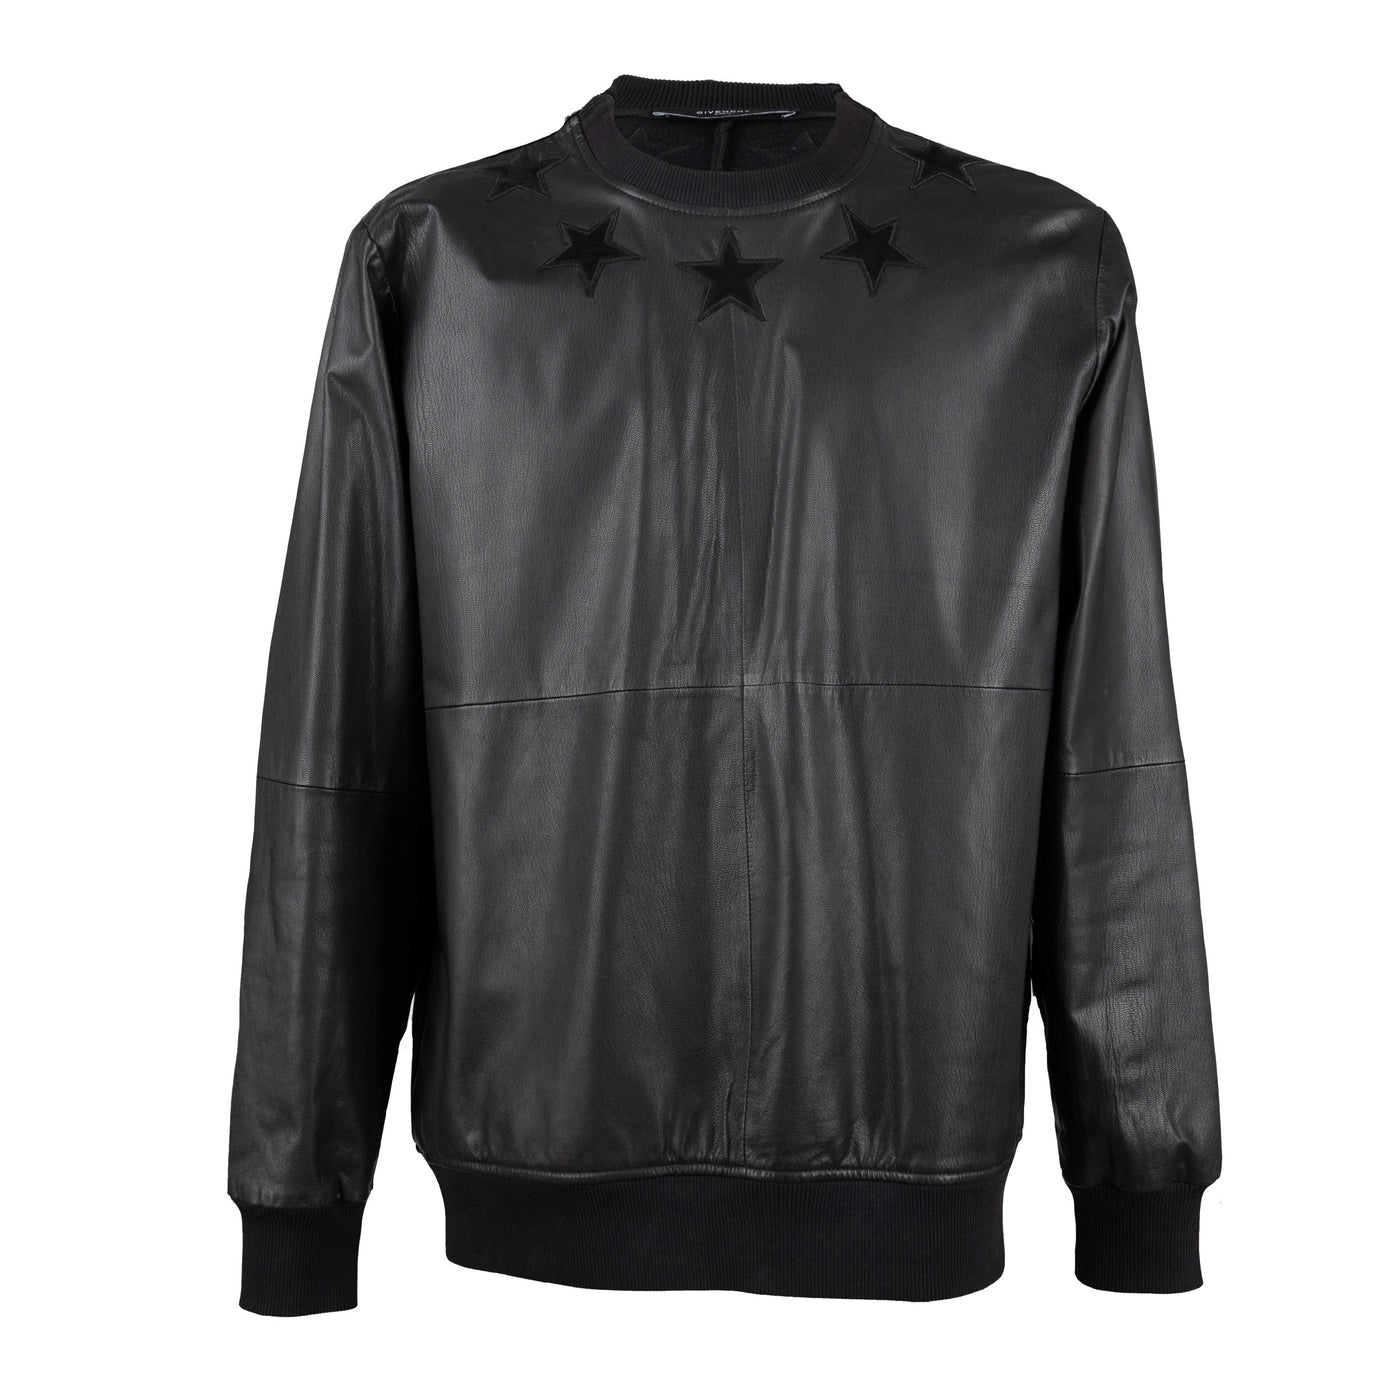 Secondhand Givenchy Sweatshirt with Embroidered Stars